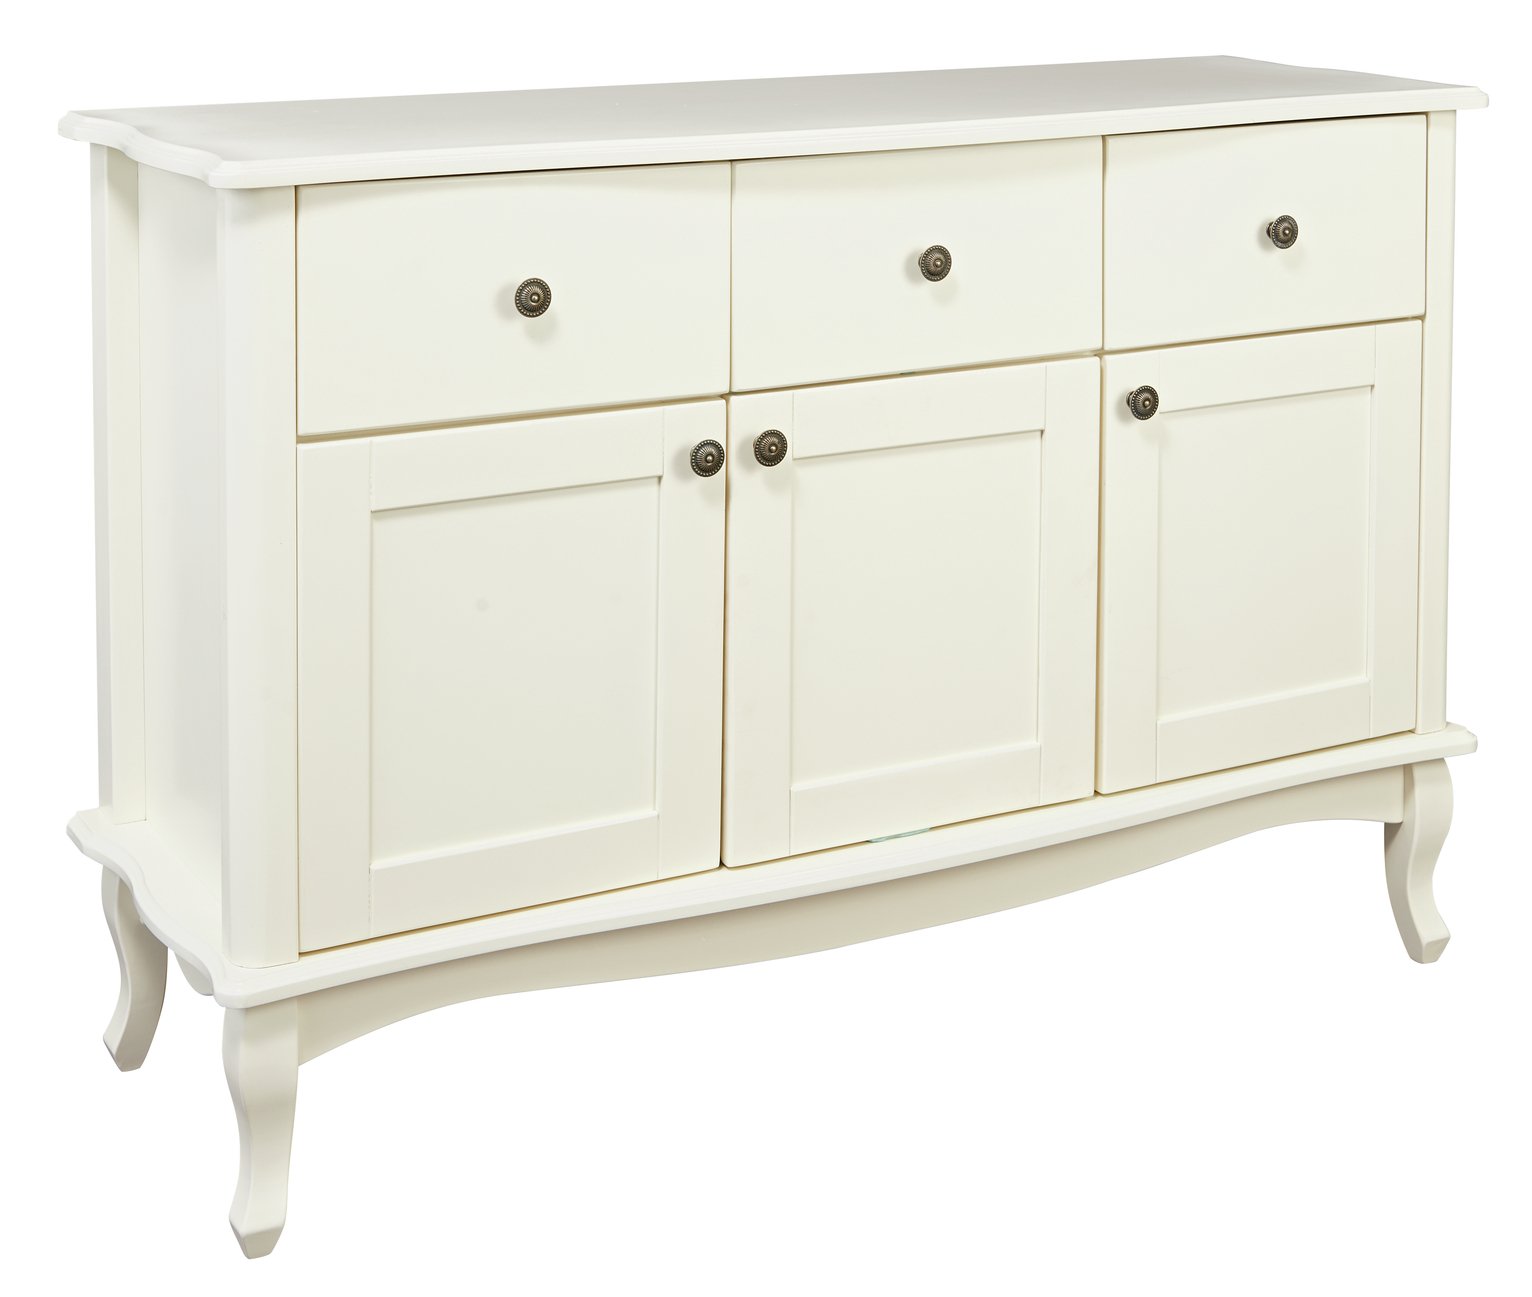 Argos Home Serenity 3 Door and 3 Drawer Sideboard -Off-White